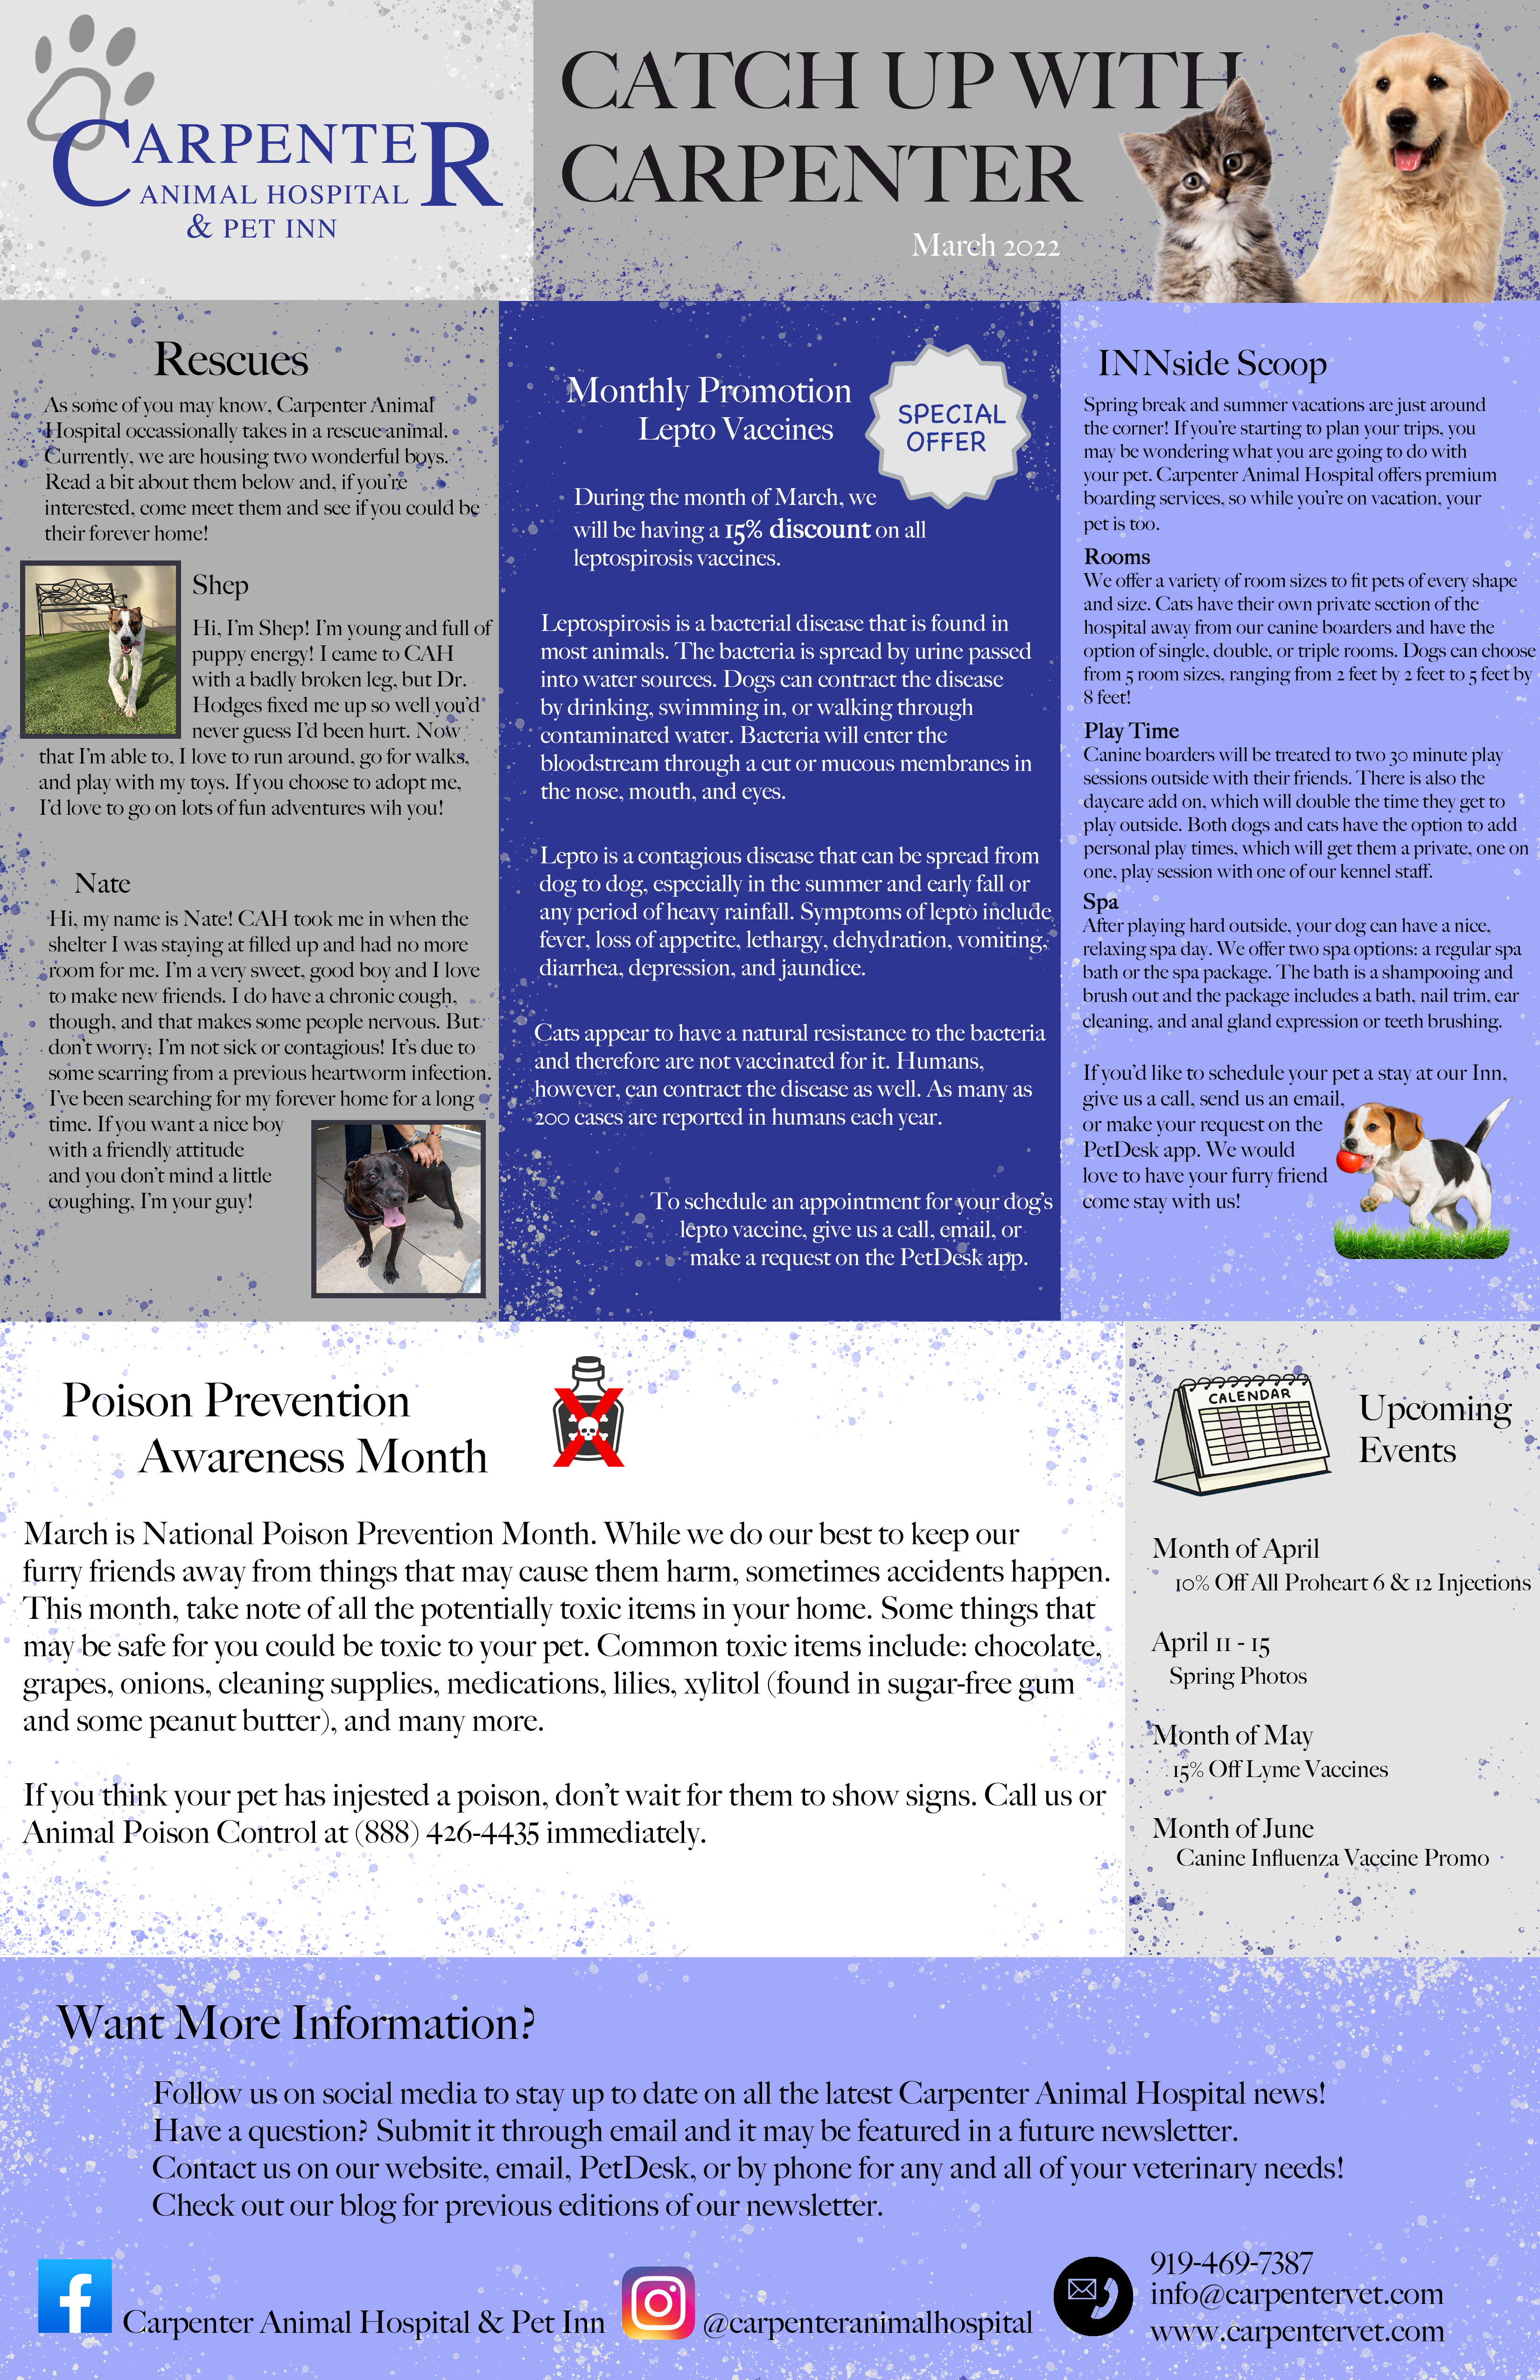 Newsletters | Carpenter Animal Hospital and Pet Inn Cary, NC